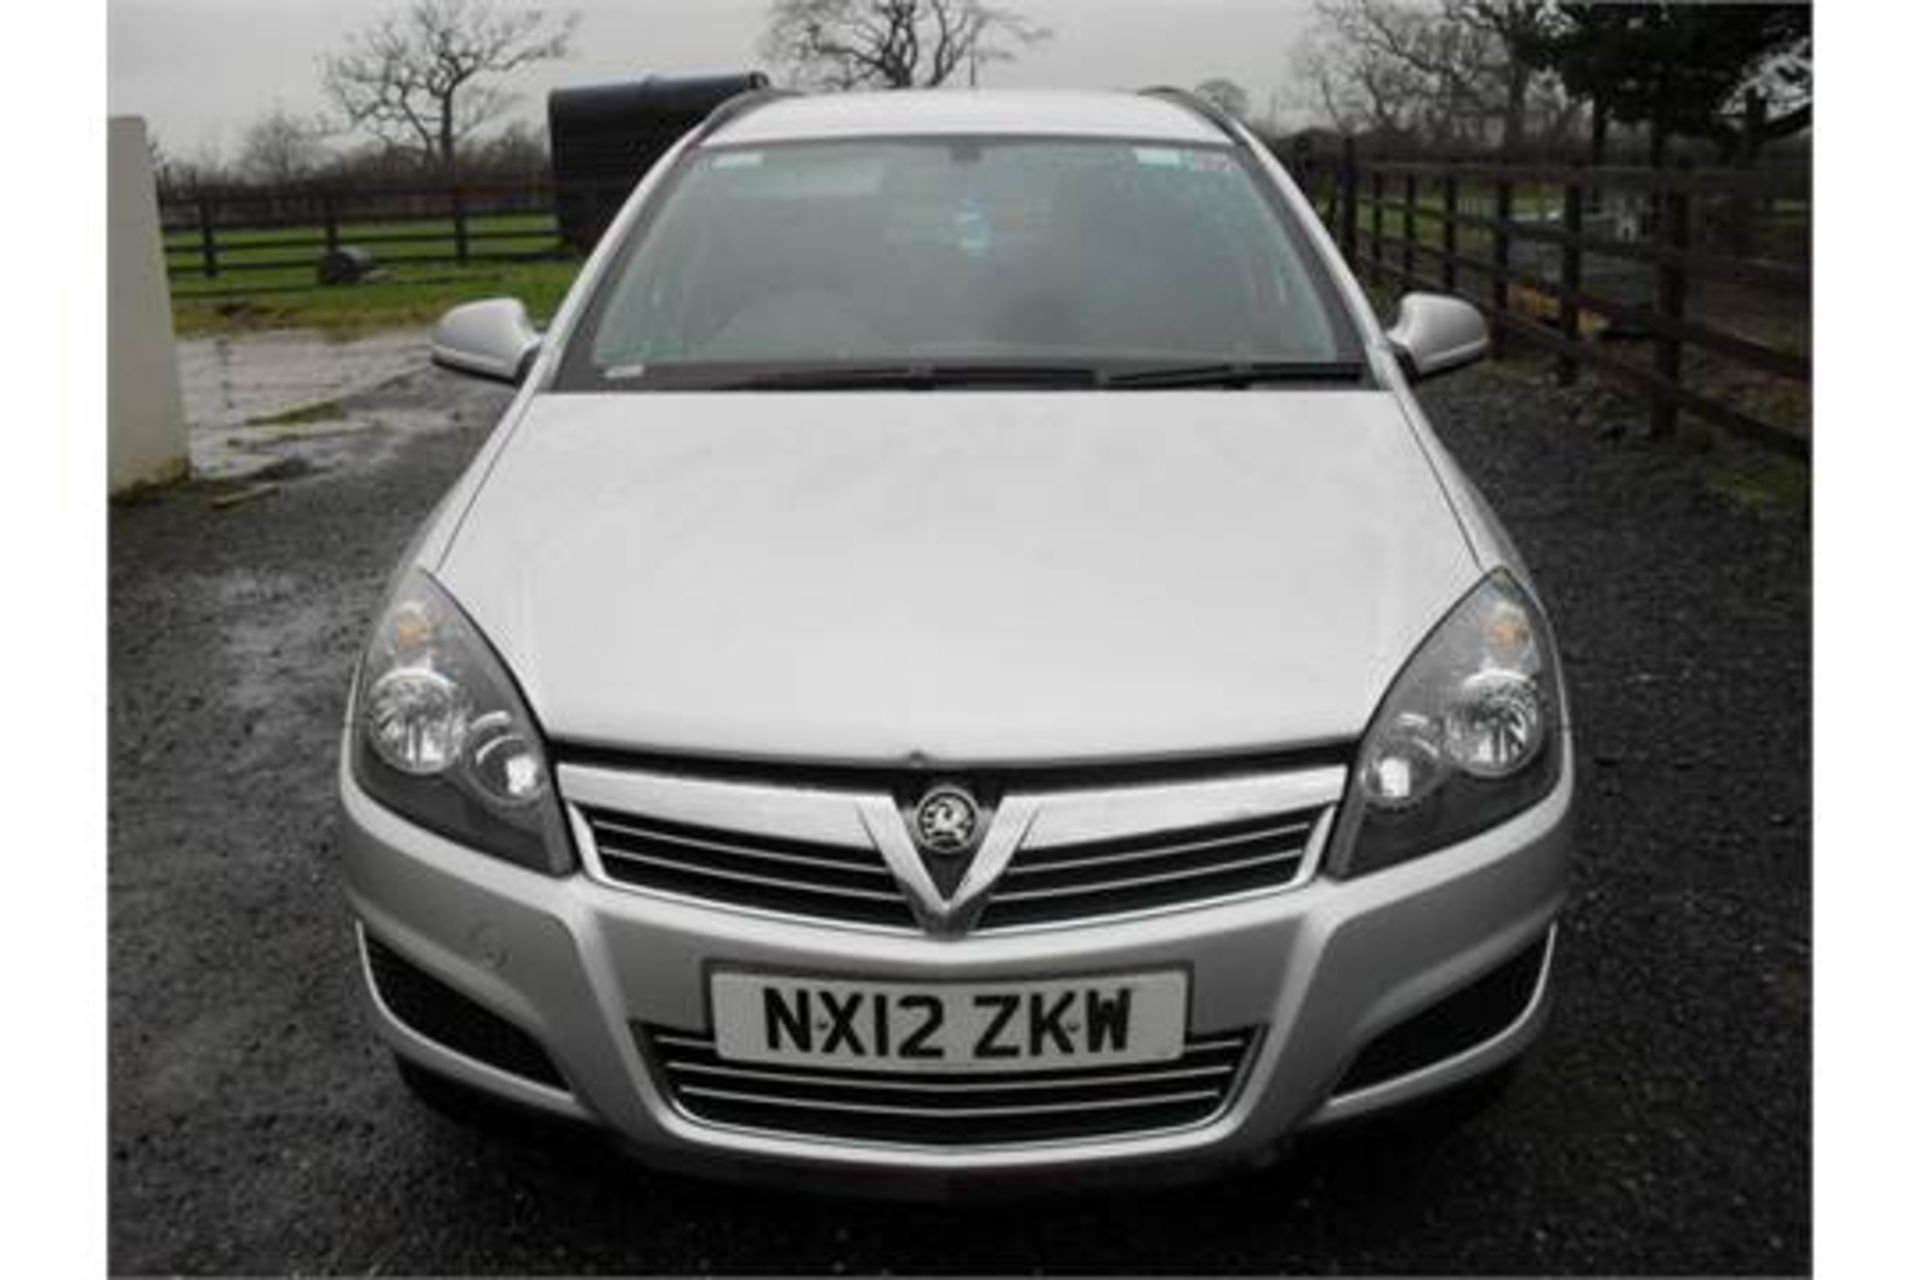 Vauxhall Astravan Sportive 1.7CDTi, Registration No. NX12 ZKW, First Registered: 13/03/12, Test Expi - Image 2 of 6